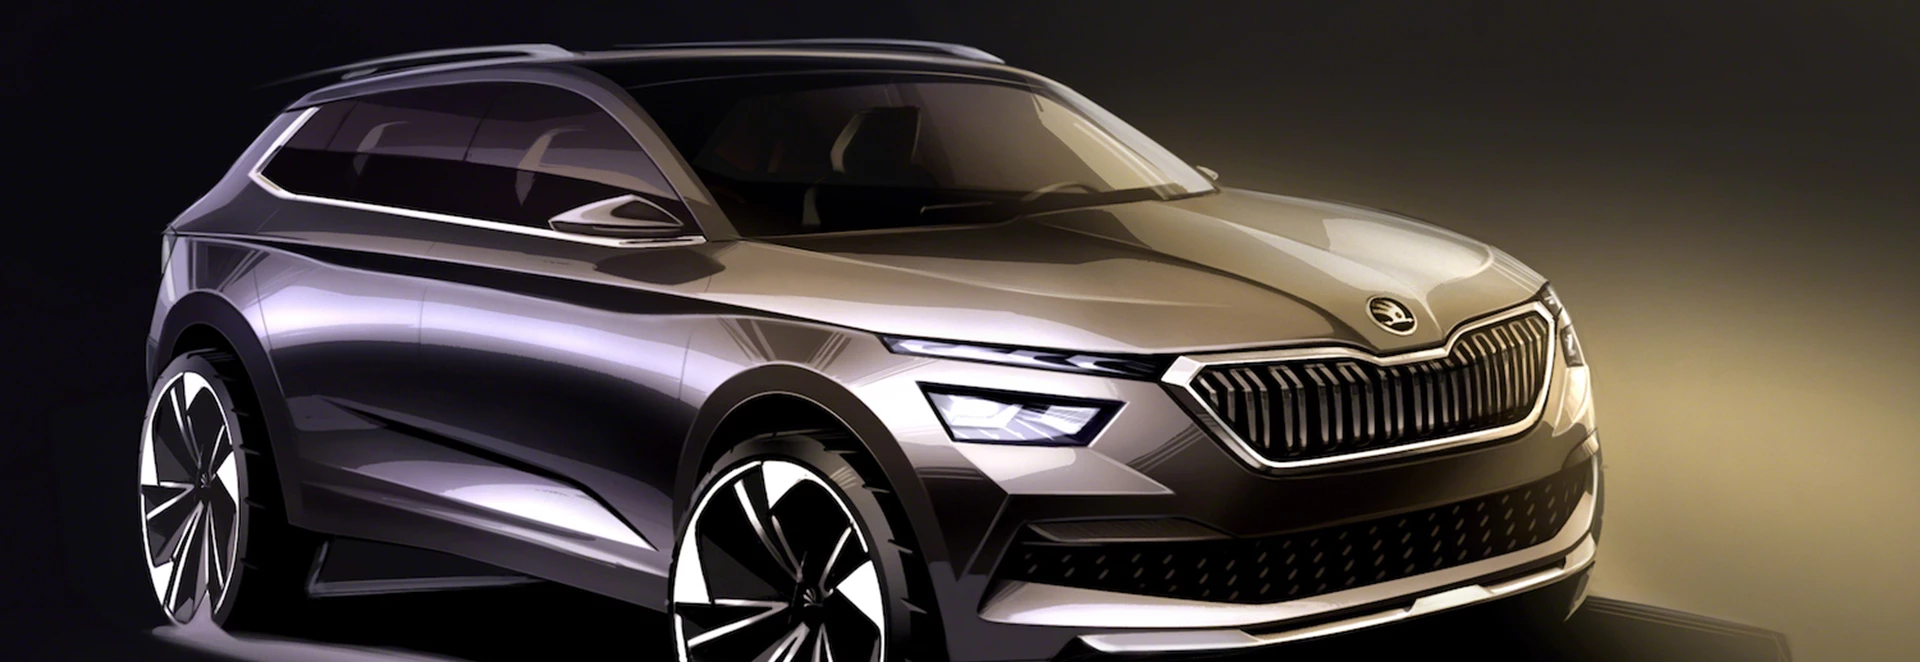 Sketches of upcoming Skoda Kamiq released